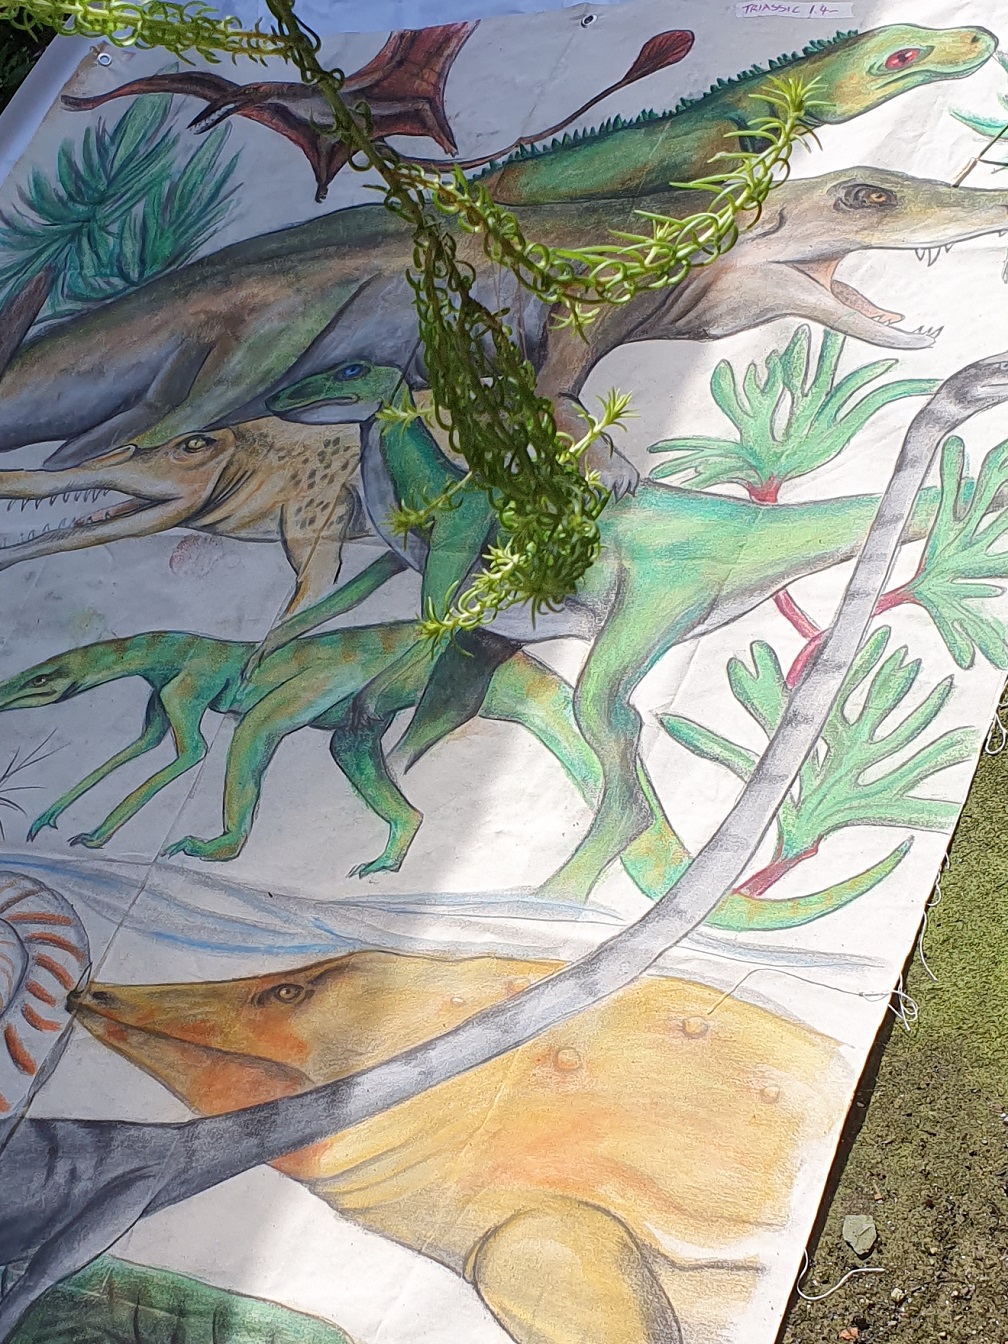 Illustrations of dinosaurs on a mural as part of the Two Minutes To Midnight exhibition.